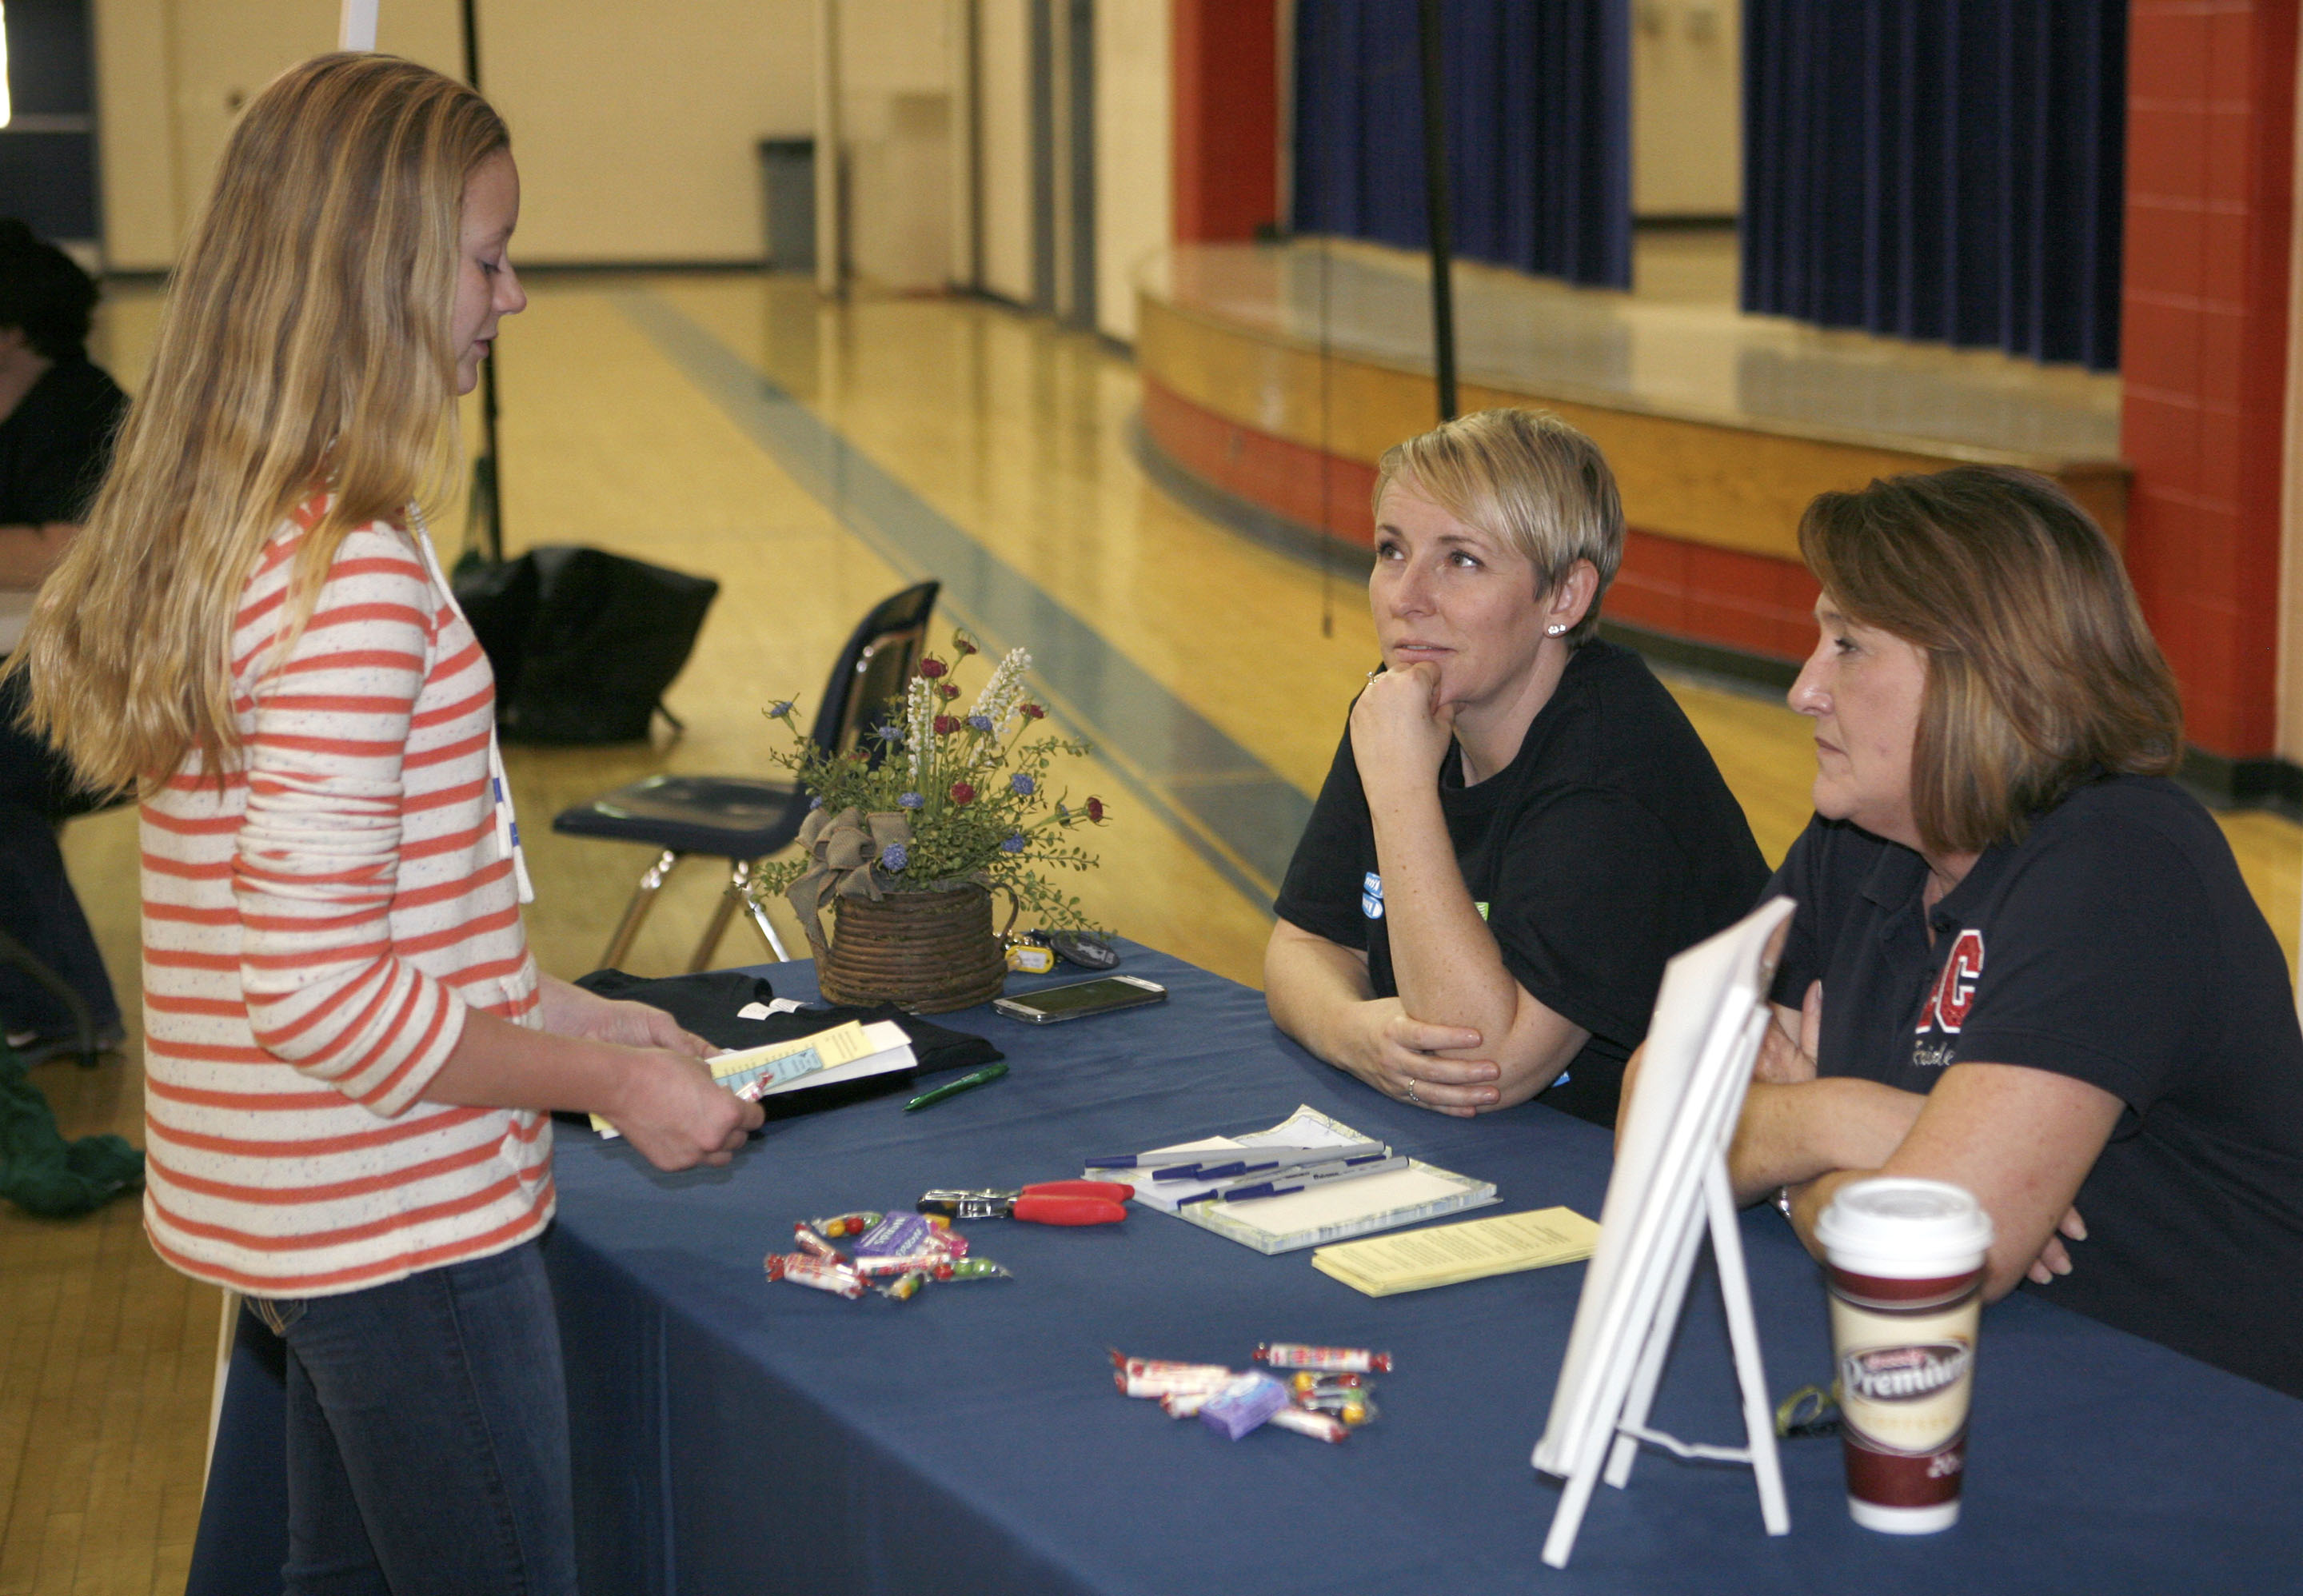 East Carter Middle School (Carter County) Assistant Principal Kelley Moore, center, and Principal Jenny Stark, right, talk with 8th-grader Kady Lewis during a parent night held to raise awareness about the Olweus Bullying Prevention Program, which the school implemented earlier this year. Photo by Mike Marsee, Nov. 12, 2015